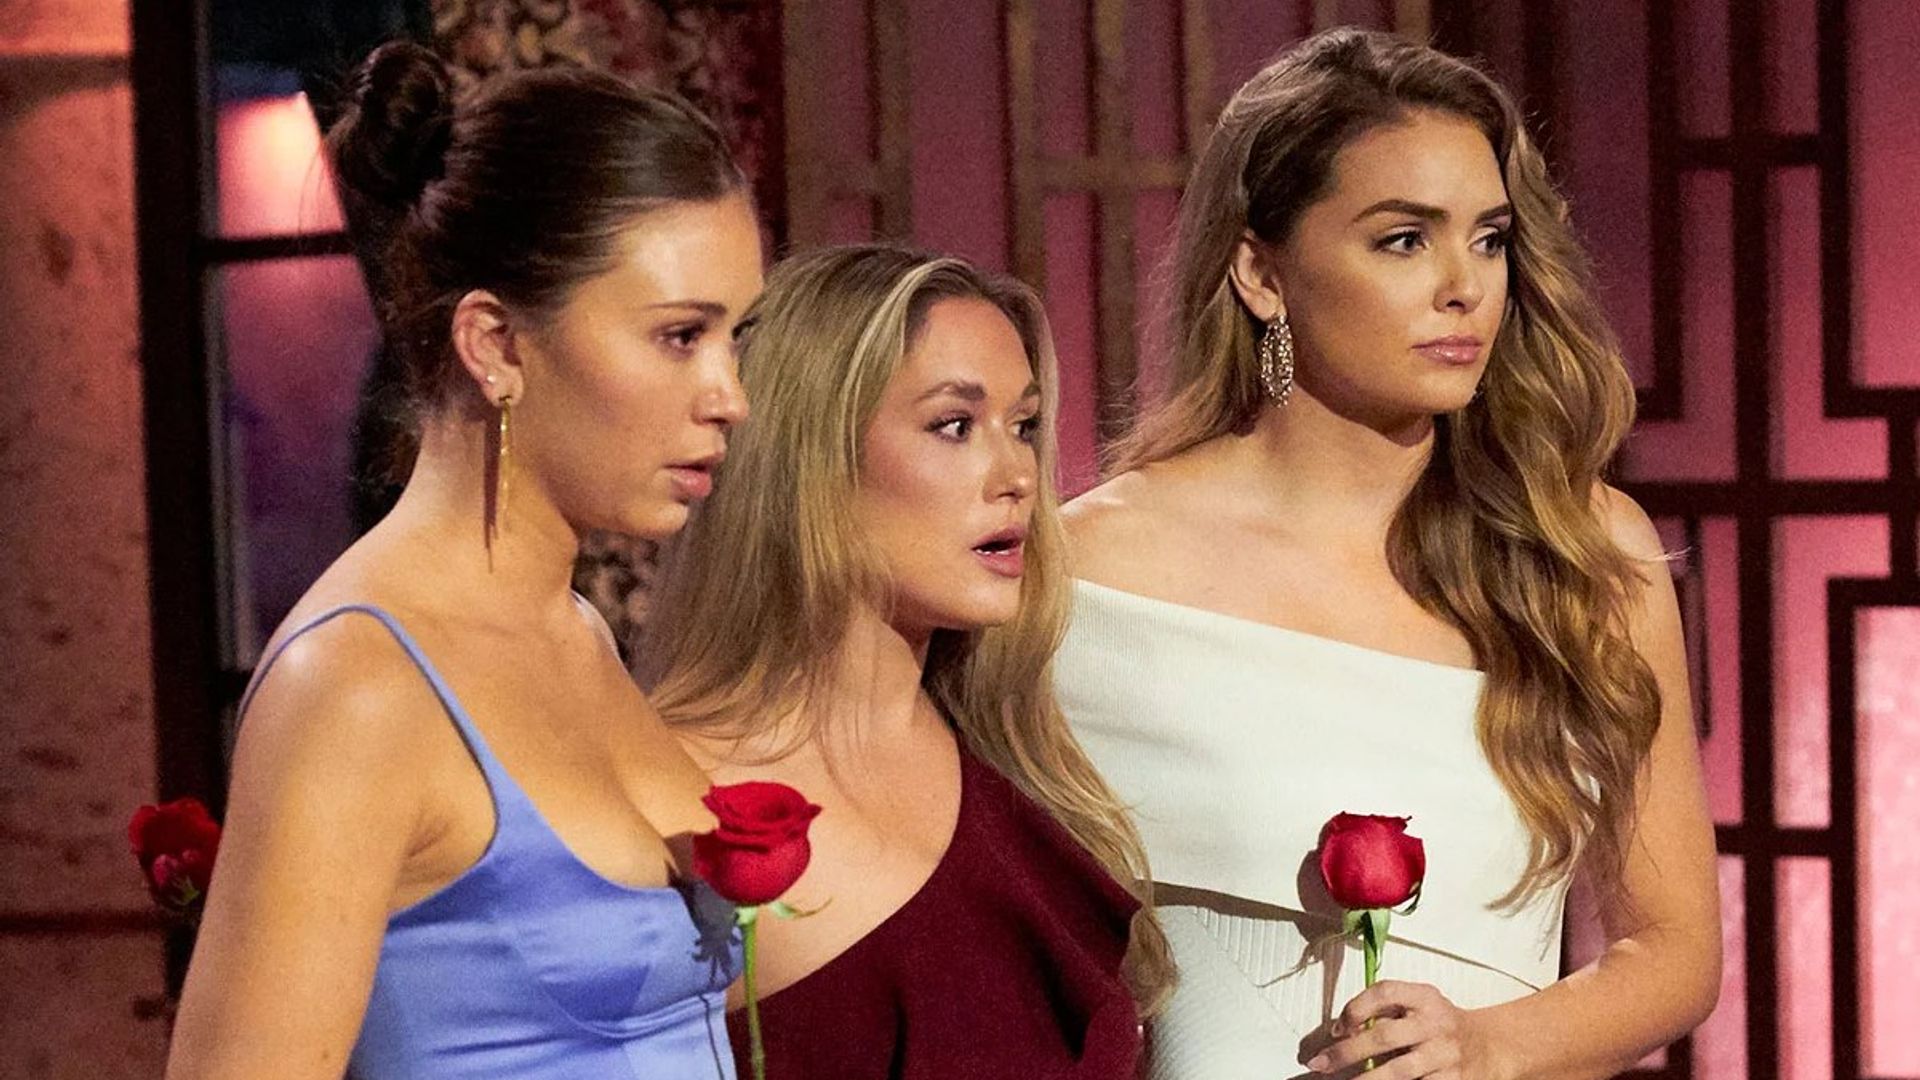 The Bachelor's Clayton Echard makes surprising reveal after shocking season finale